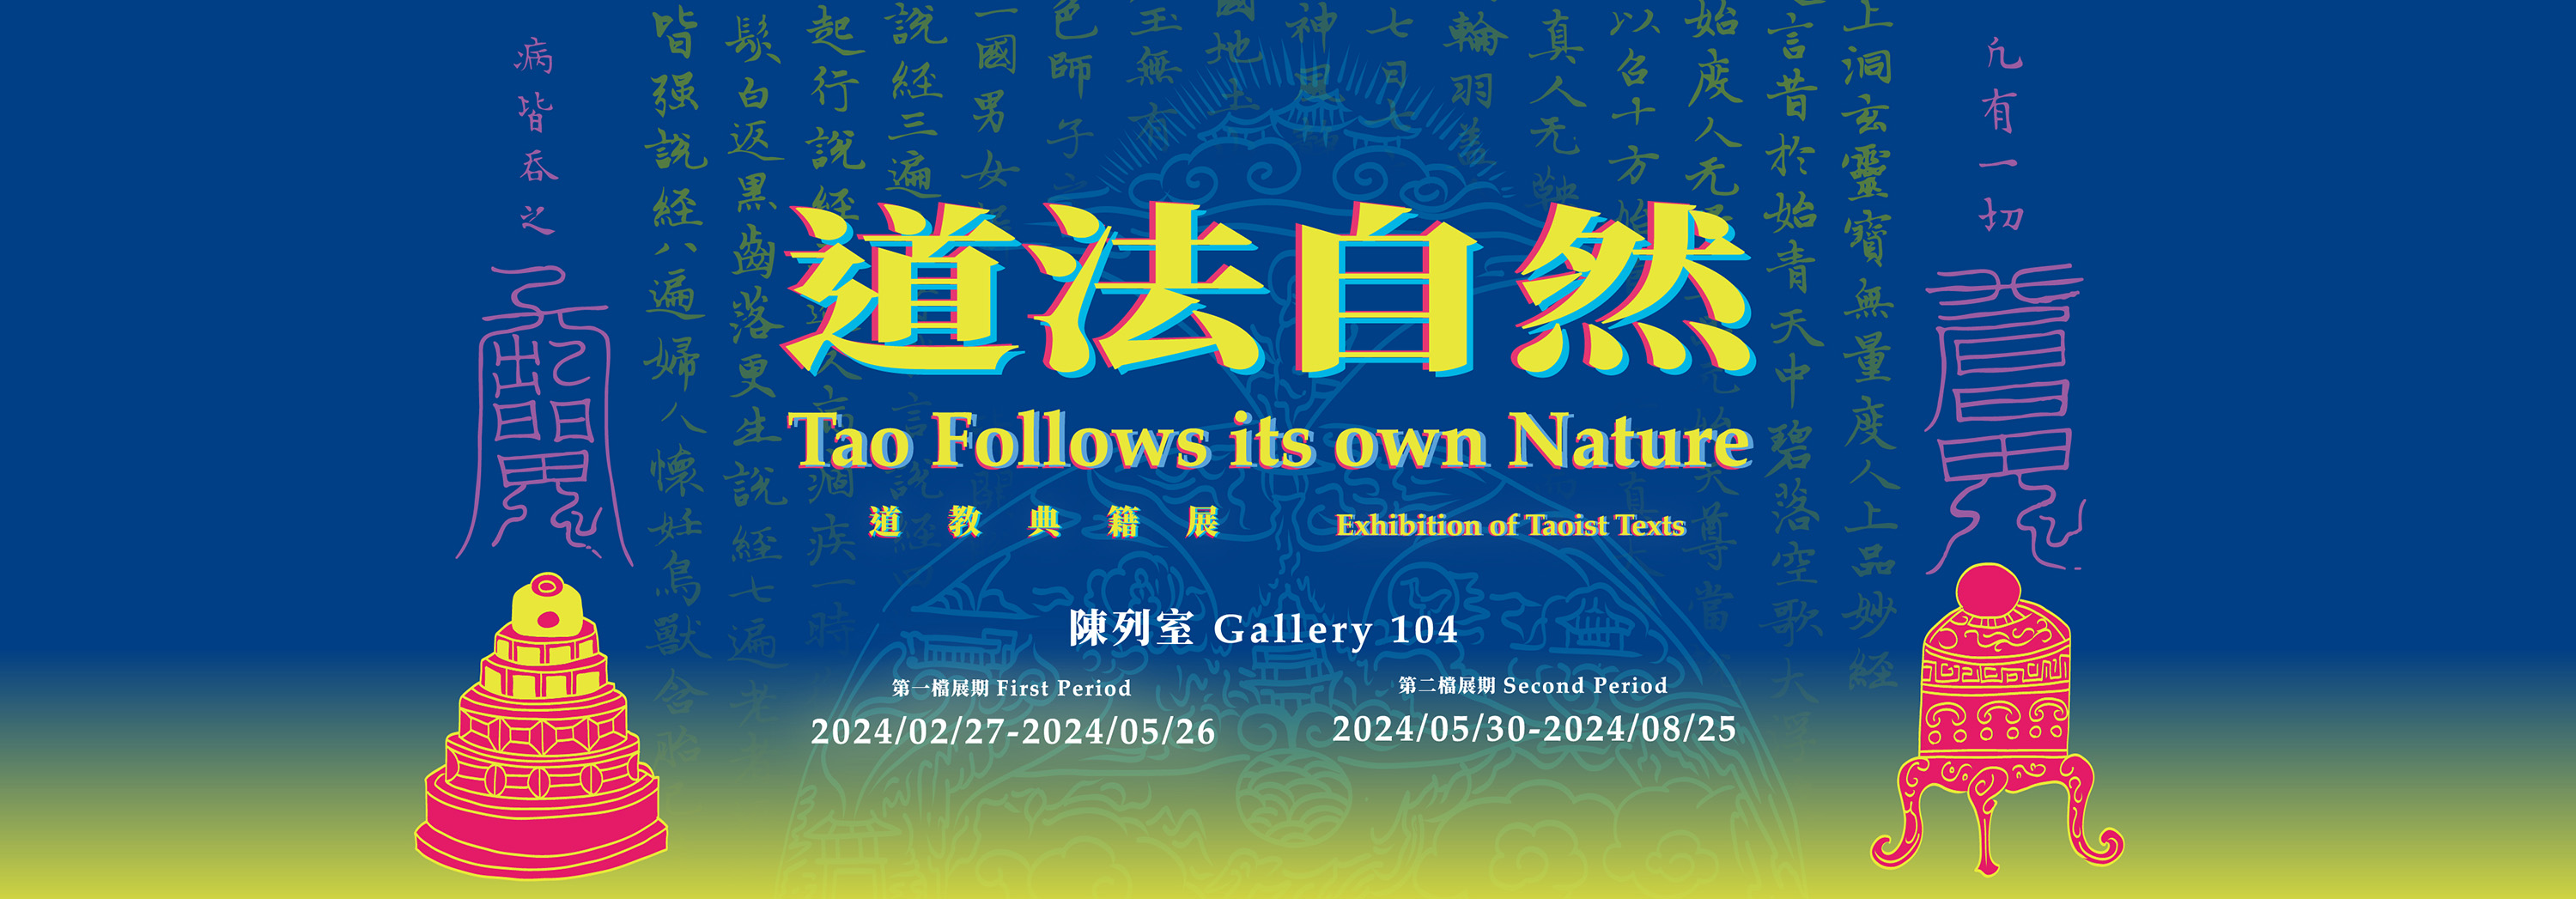 Tao Follows its own Nature - Exhibition of Taoist Texts